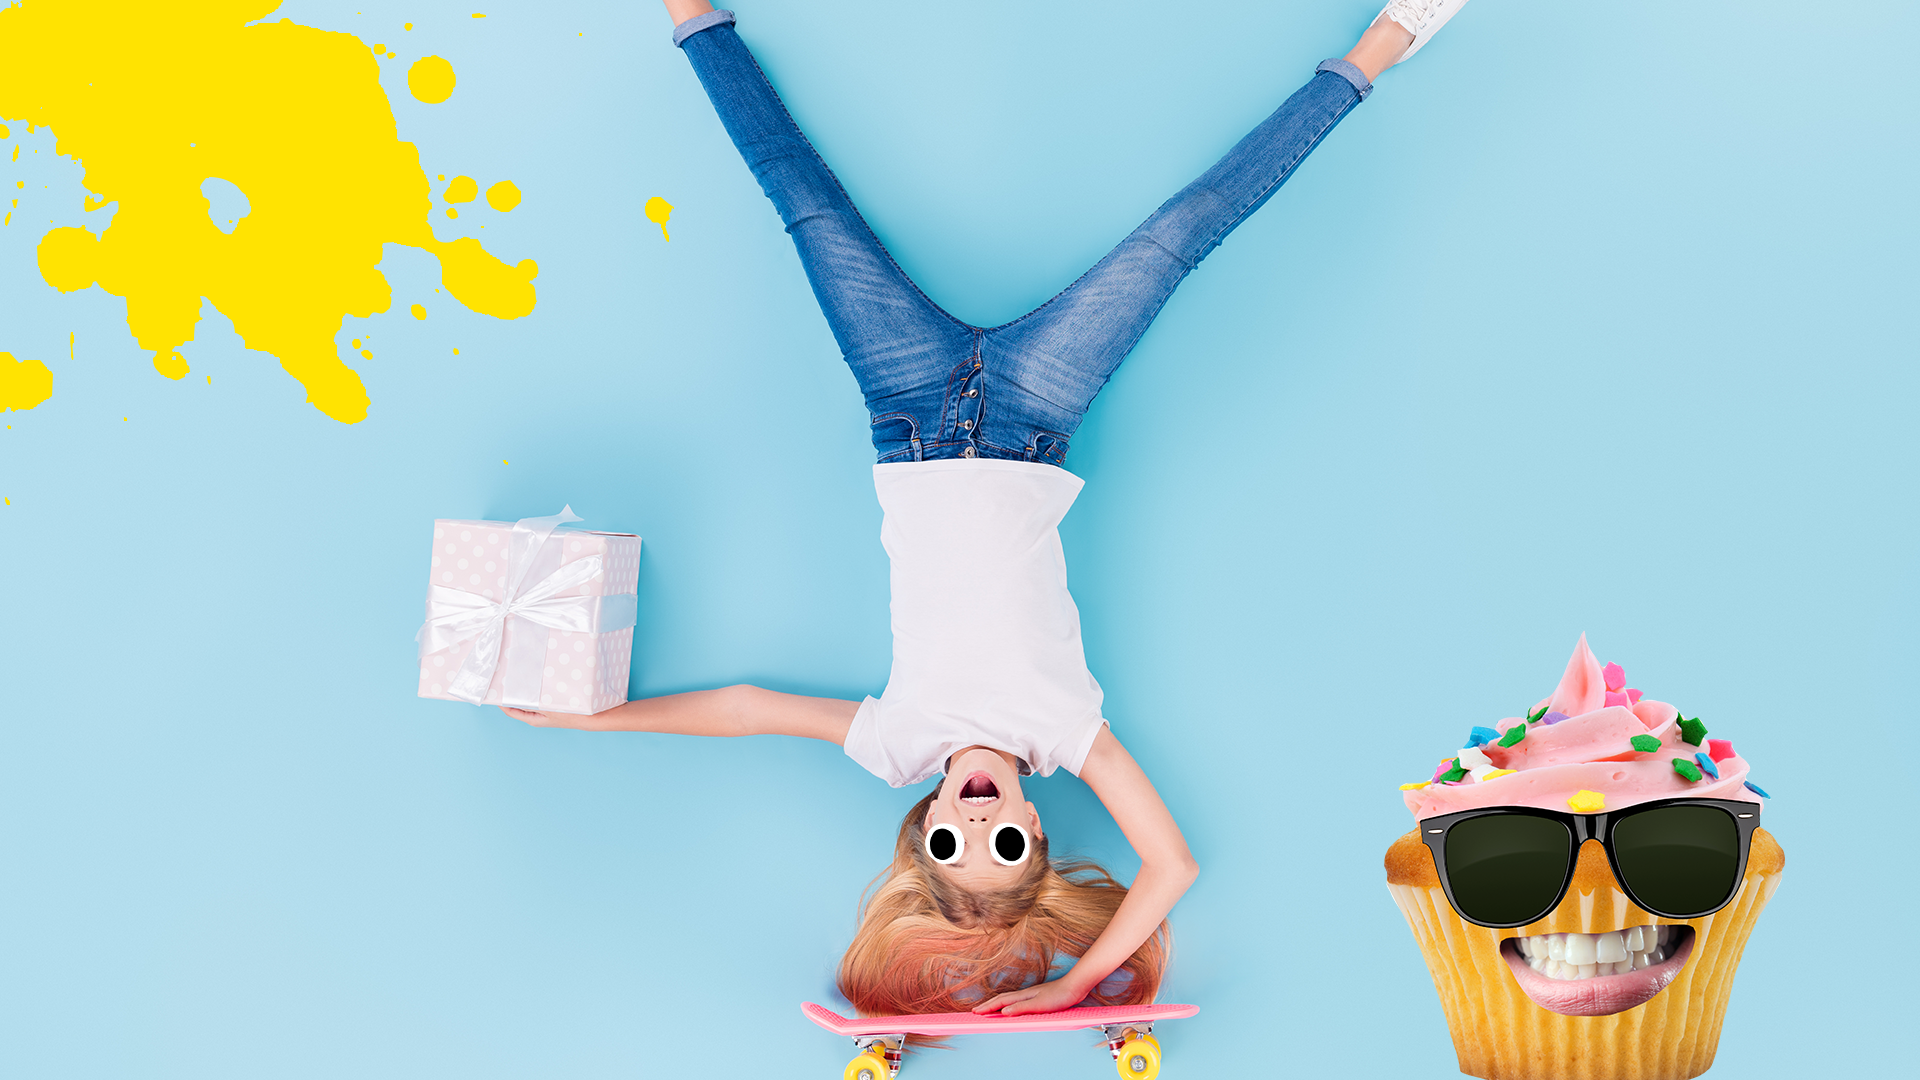 Girl upsidedown on skateboard with present and cool fairy cake